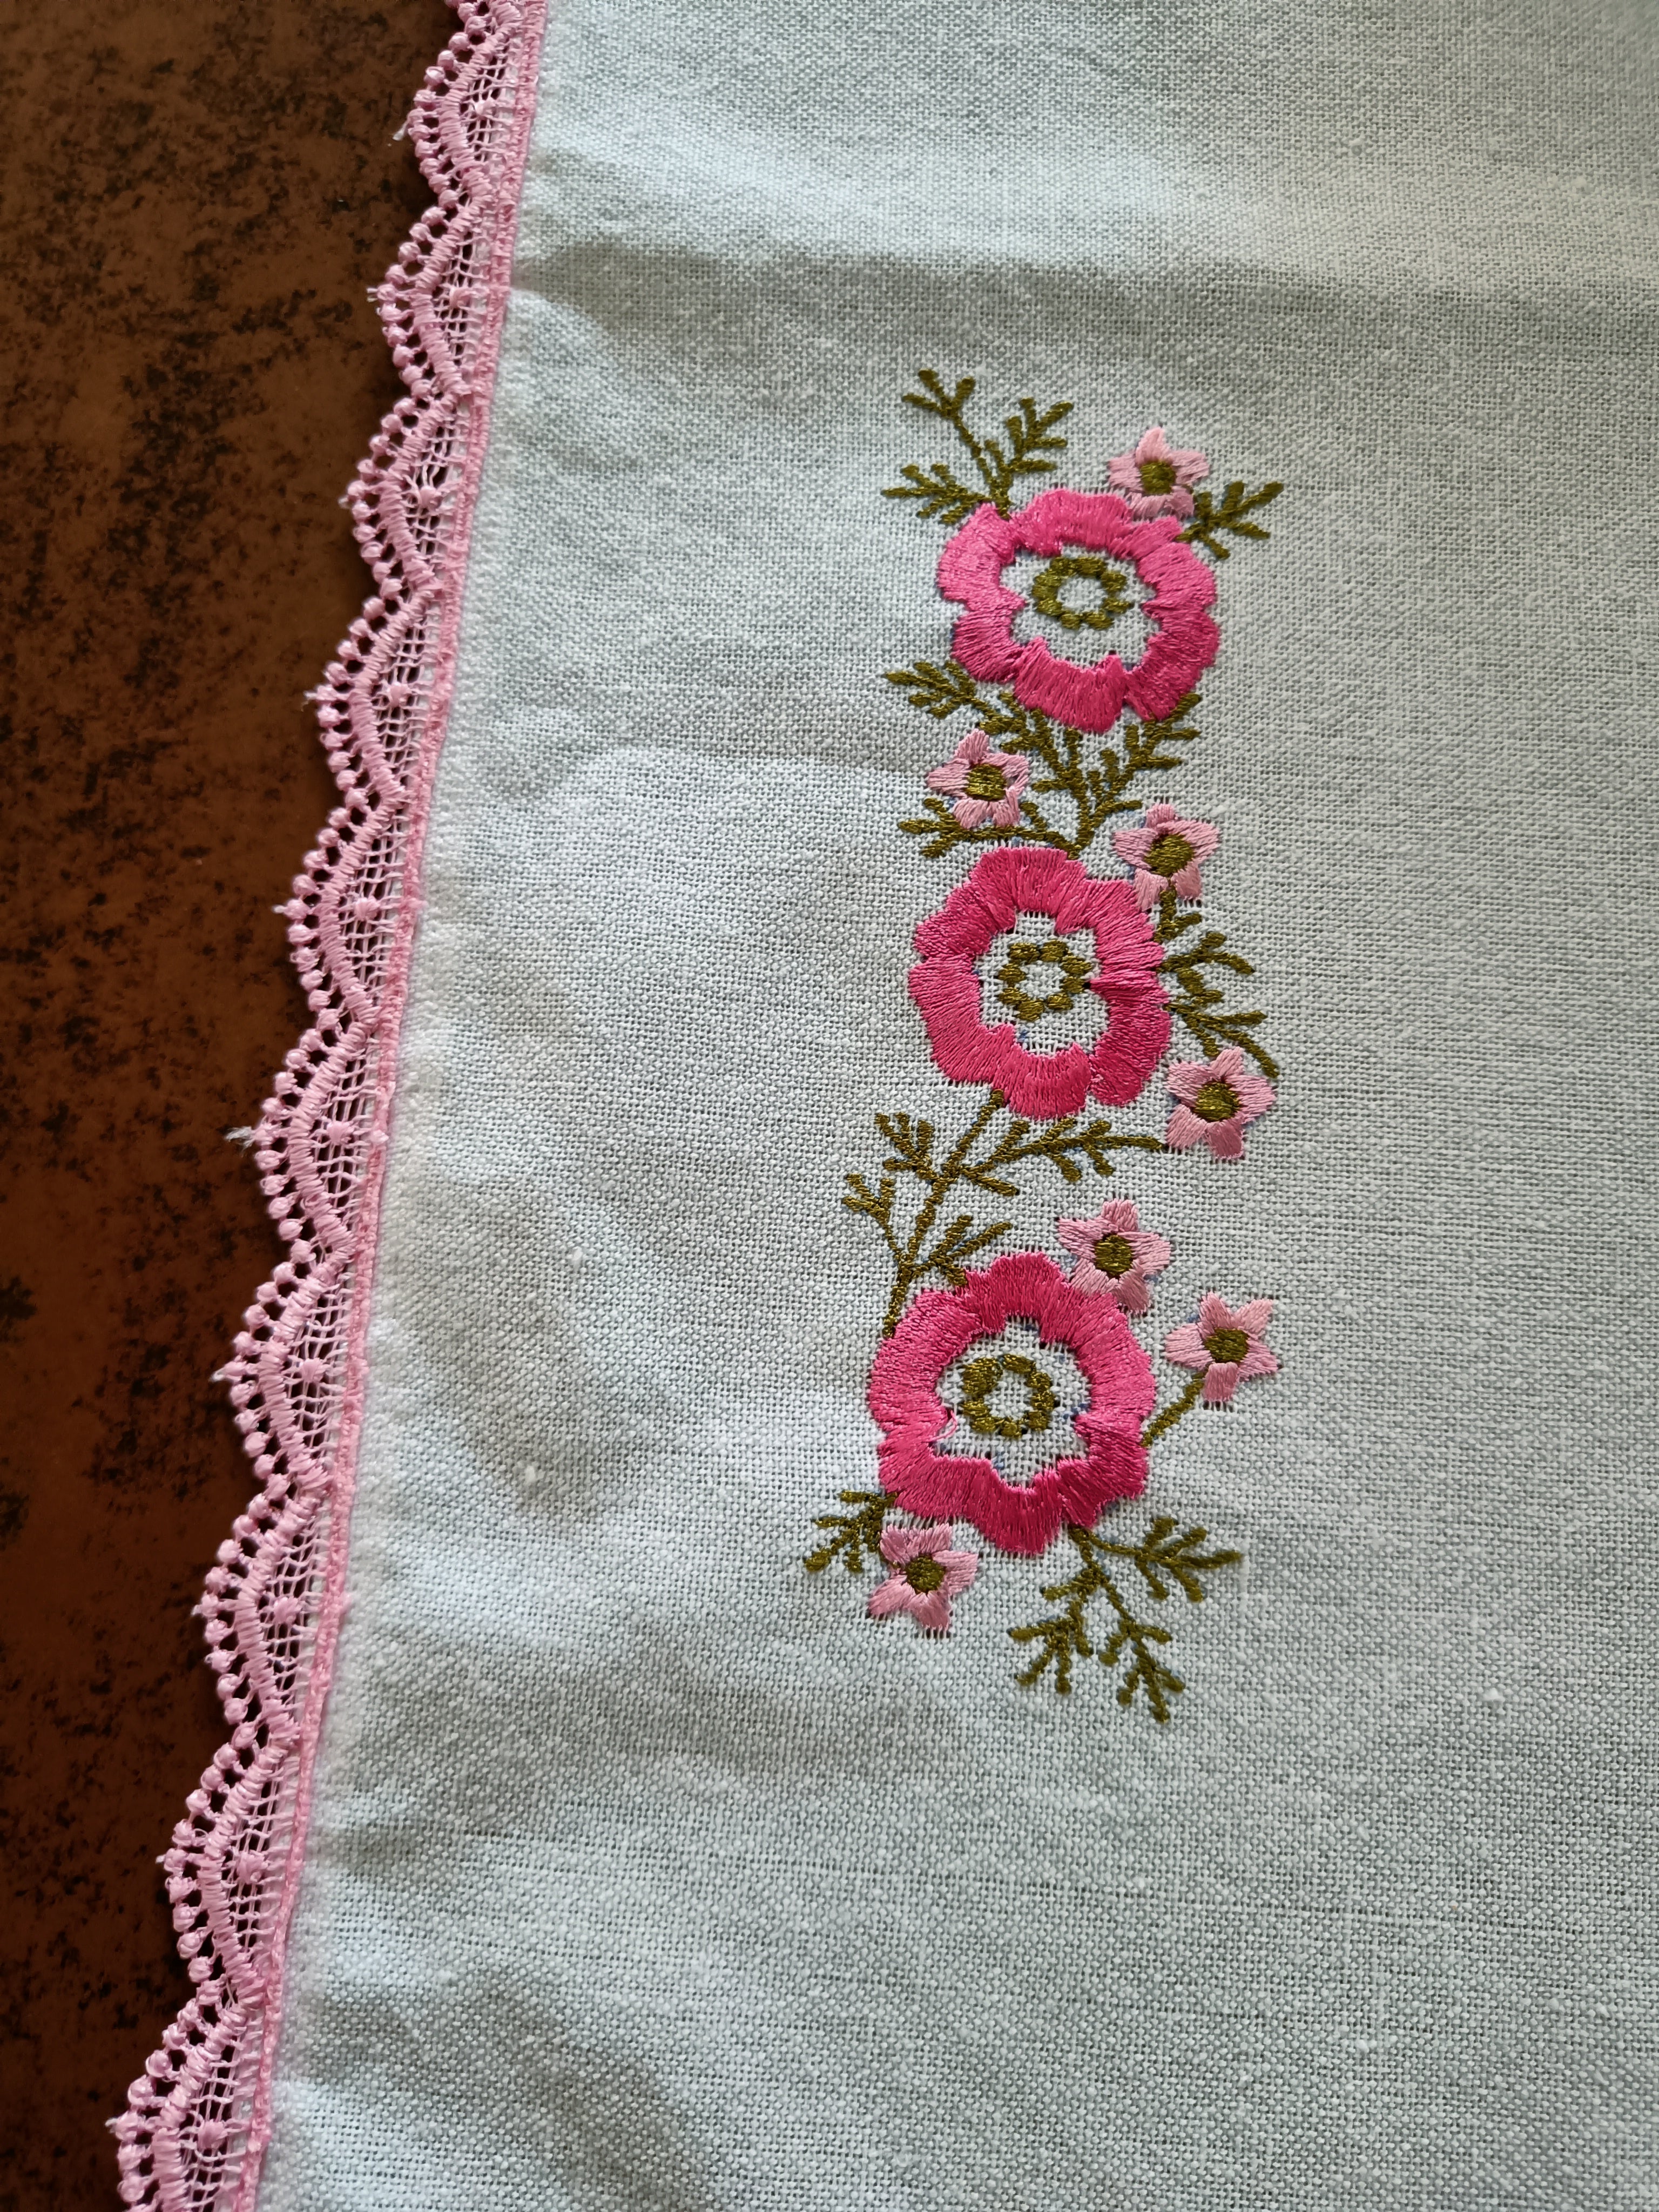 White and Pink runner with lace & floral embroidery